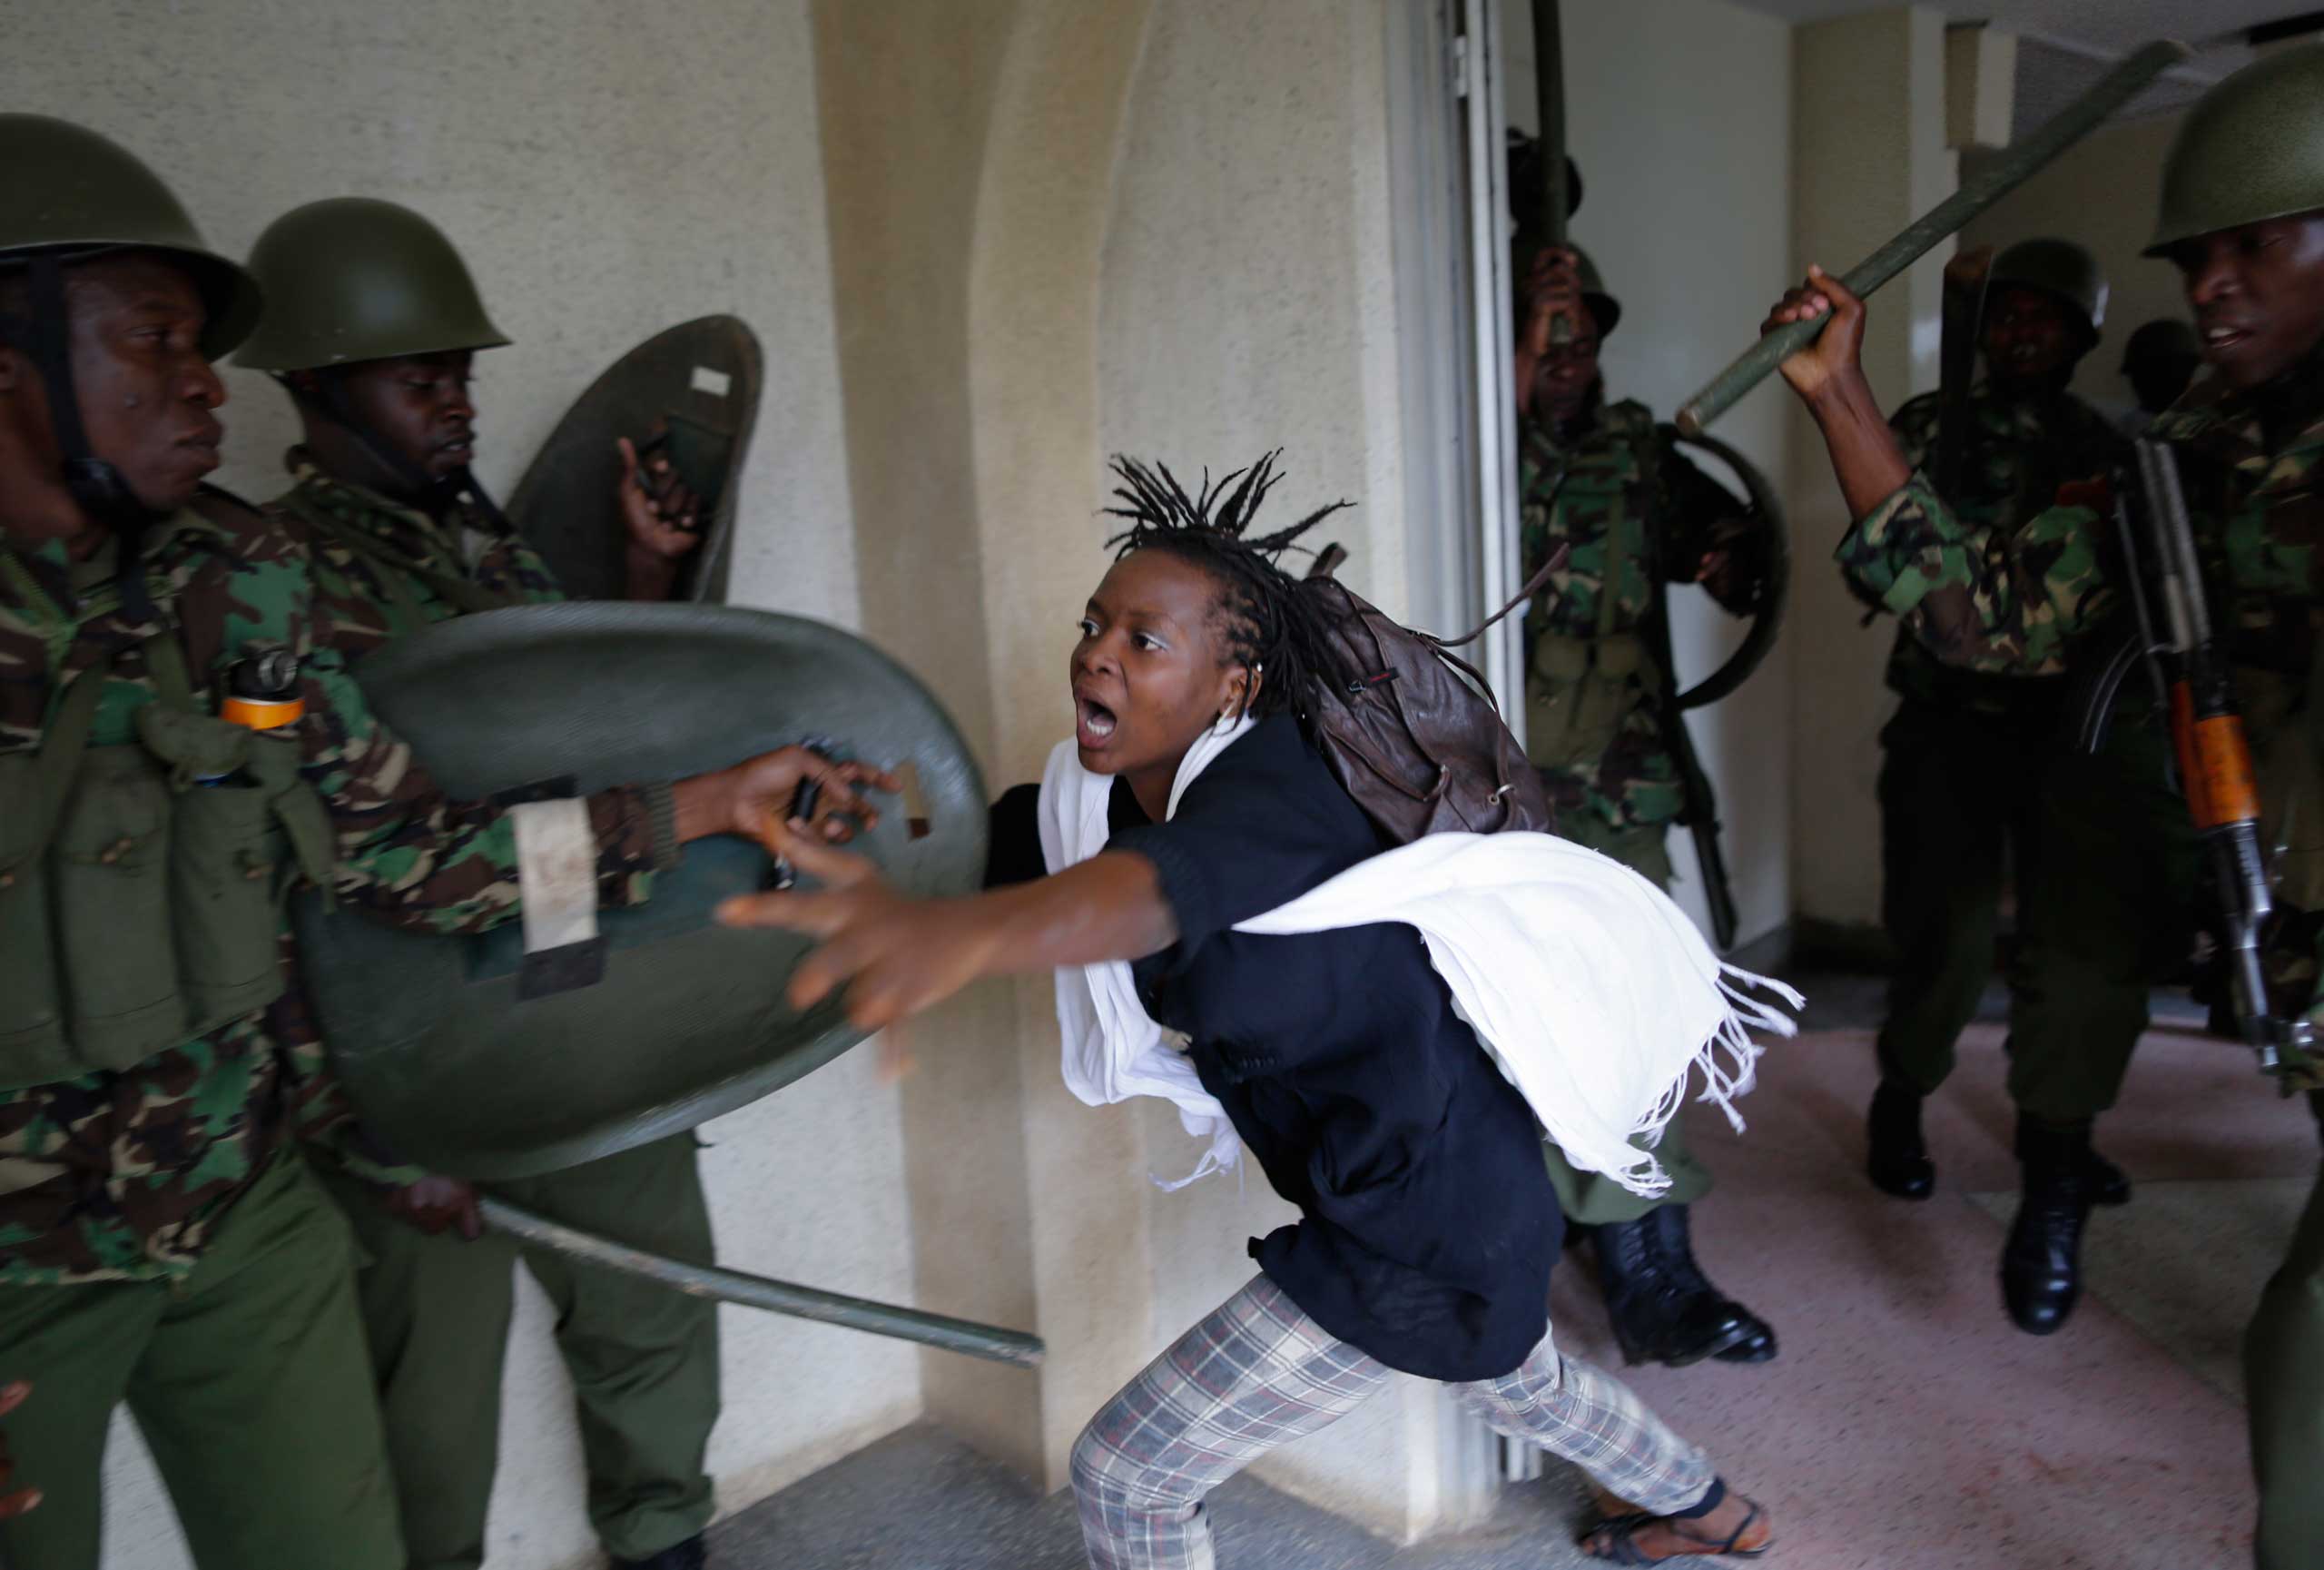 European Pressphoto Agency: Best Photos of 2014A woman flees as a riot police officer beats her with a baton, after chasing protesting students into the Nairobi University campus in Nairobi, Kenya, May 20, 2014. The students were demonstrating against proposed tuition fee hikes.